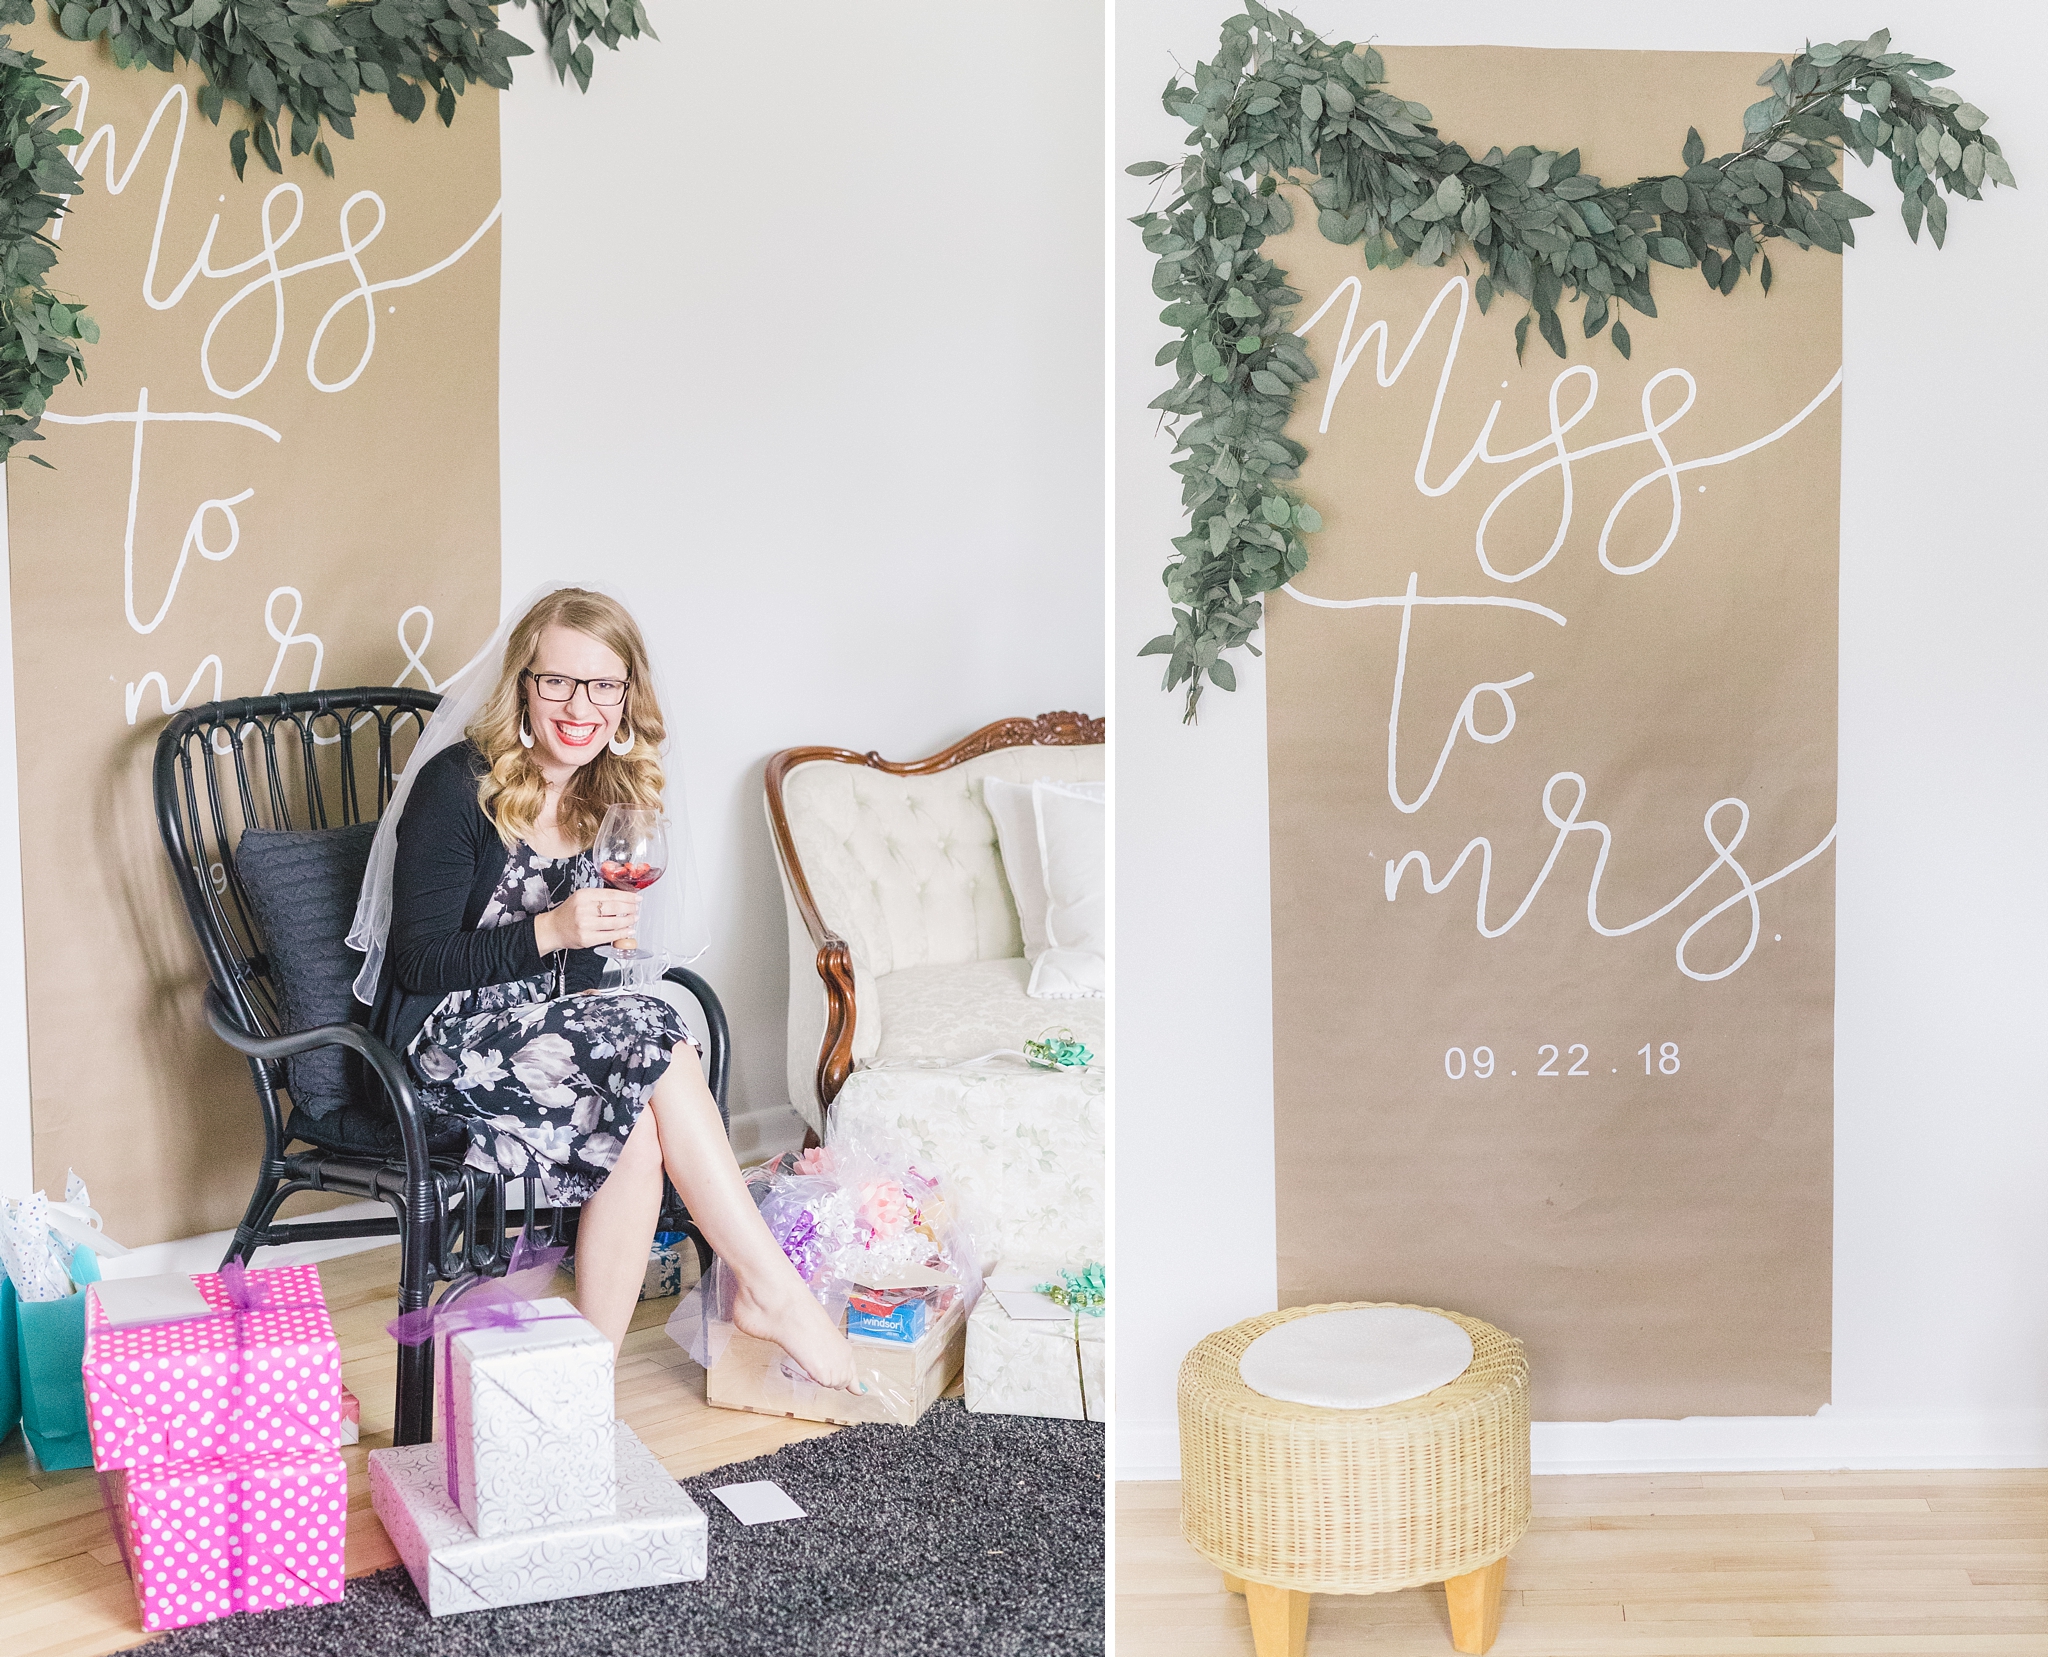 Classic Spring Bridal Shower photographed by Amy Pinder Photography